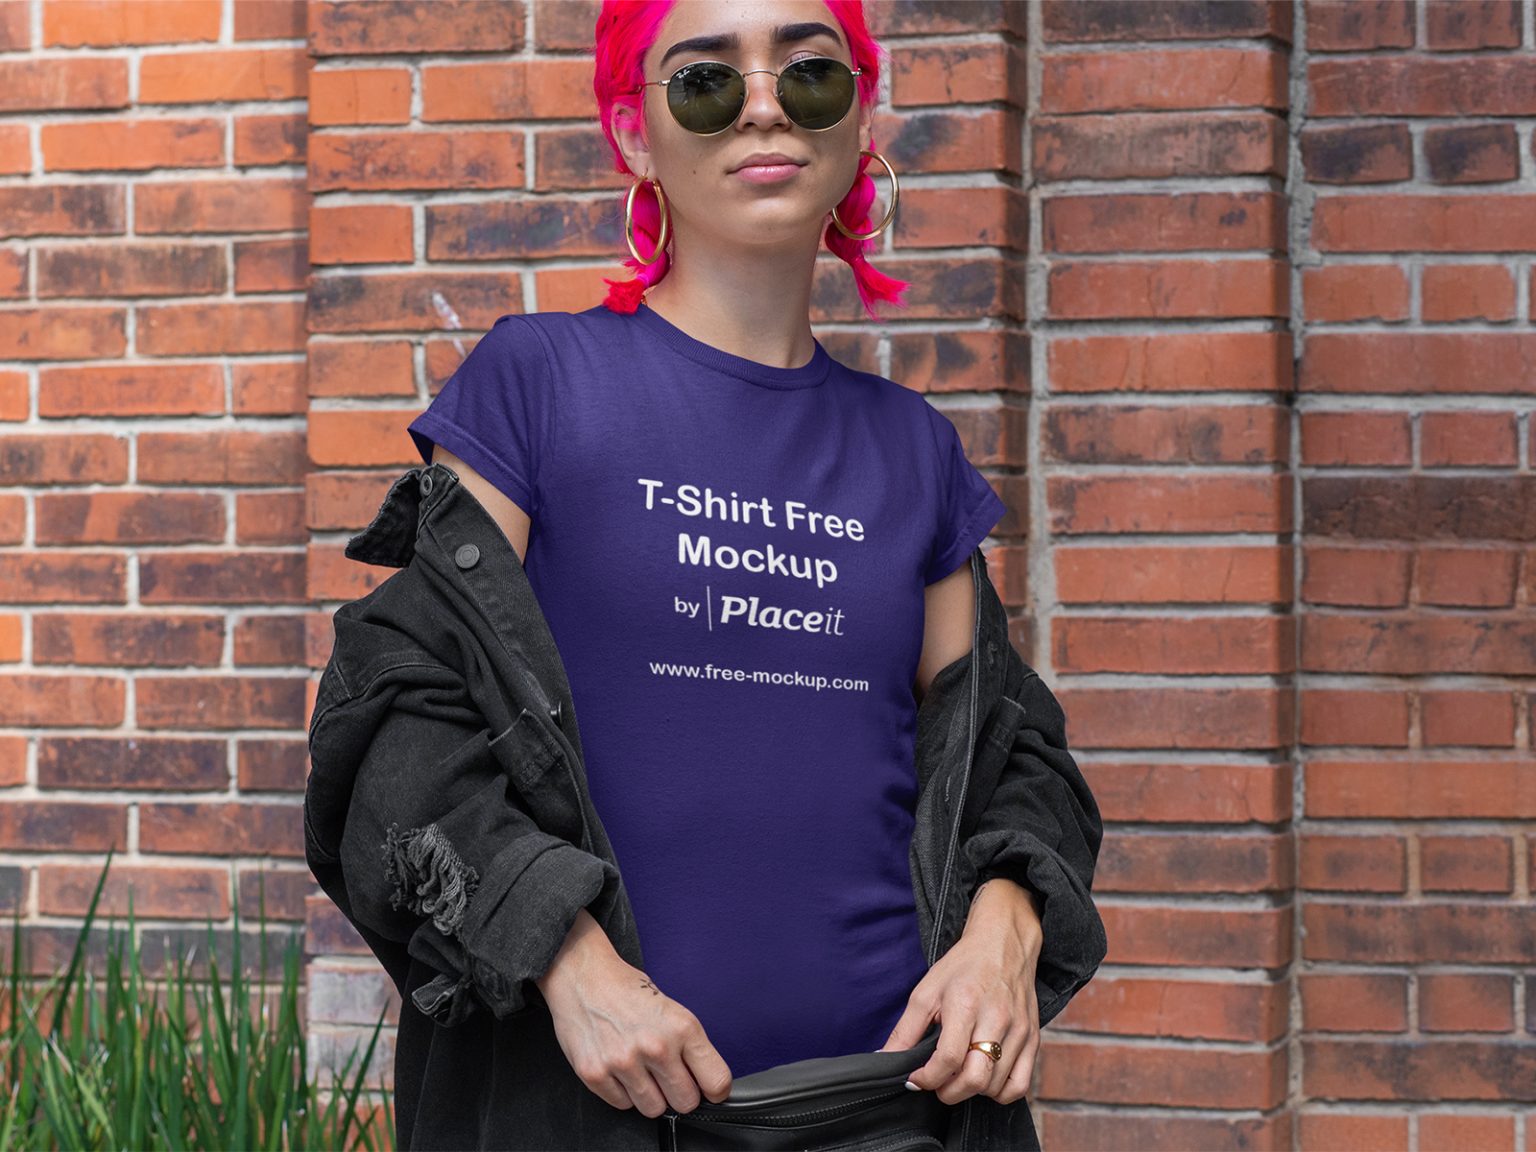 Download T-Shirt Online Free Mockup of a Woman with Pink Hair | Free Mockup